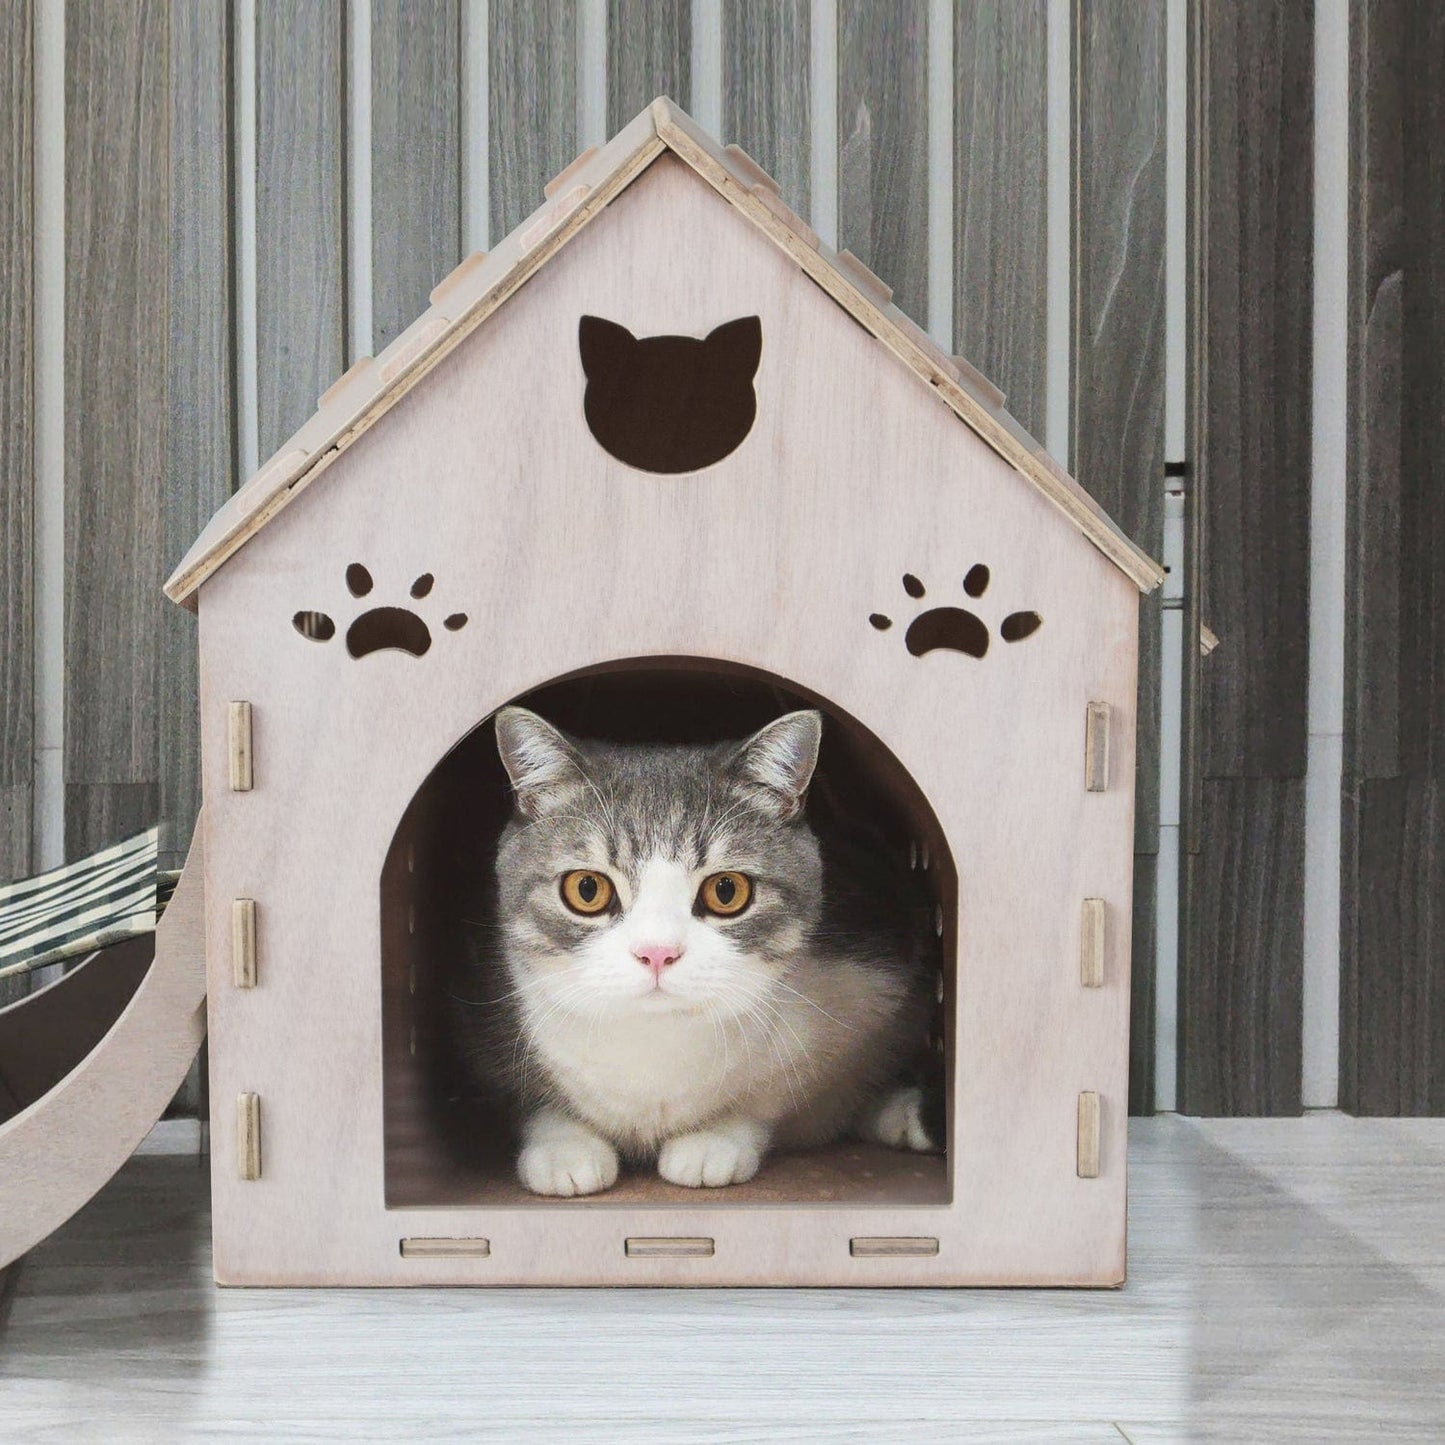 Wooden Kitty House Cat Shelter House for Cats, Rabbits, Dogs and Small Pets